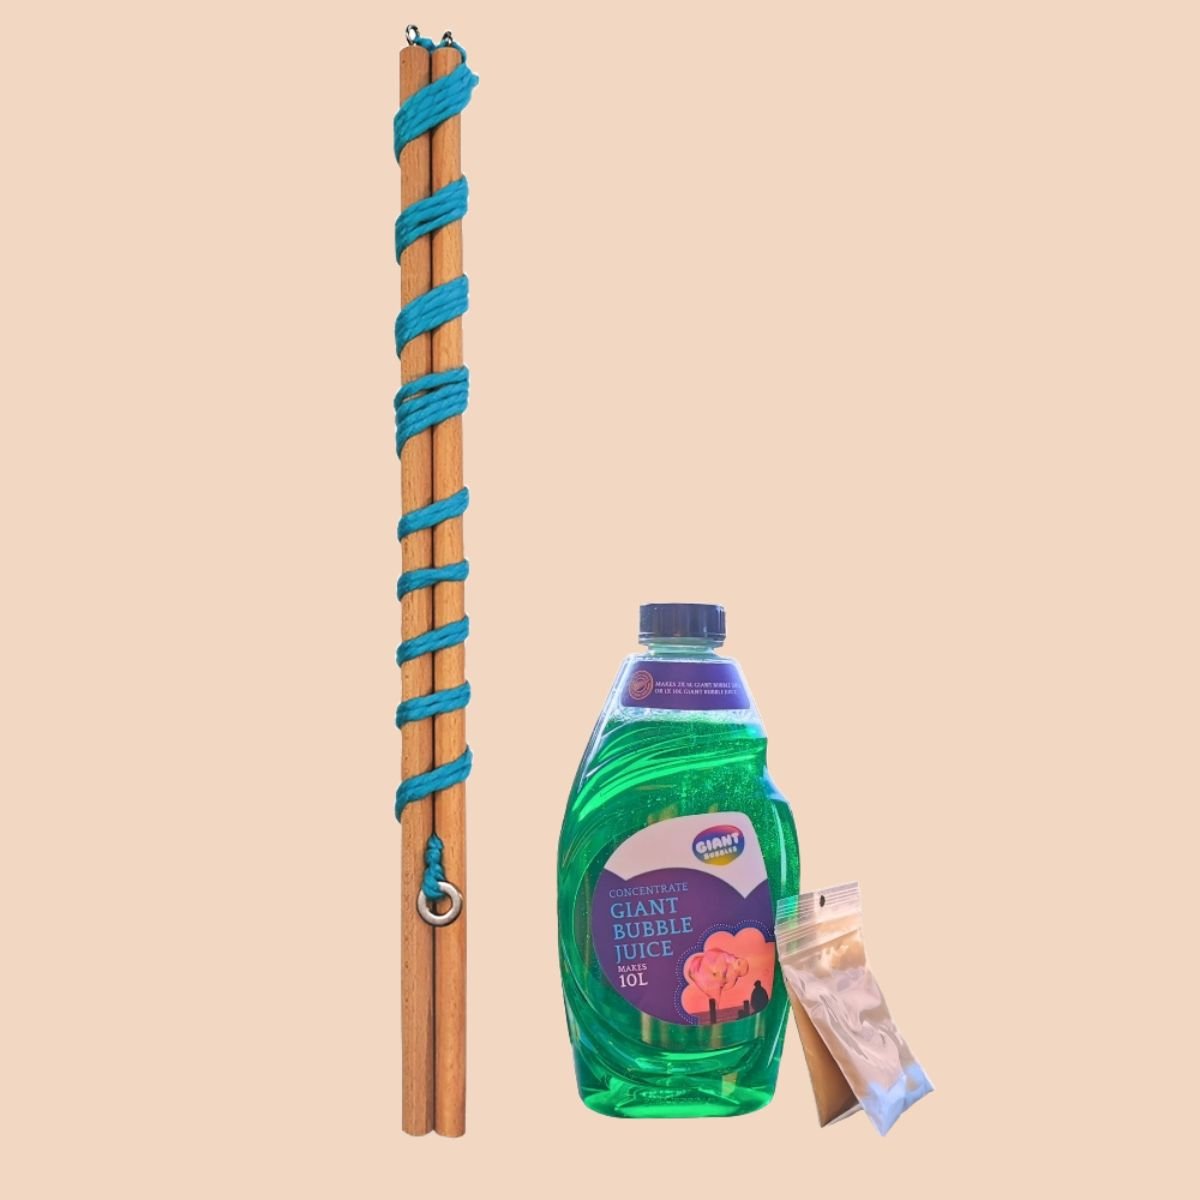 10L Giant Bubble Concentrate + Giant Bubble Wand - Giant Bubbles by Tinka - Tinka Giant Bubbles